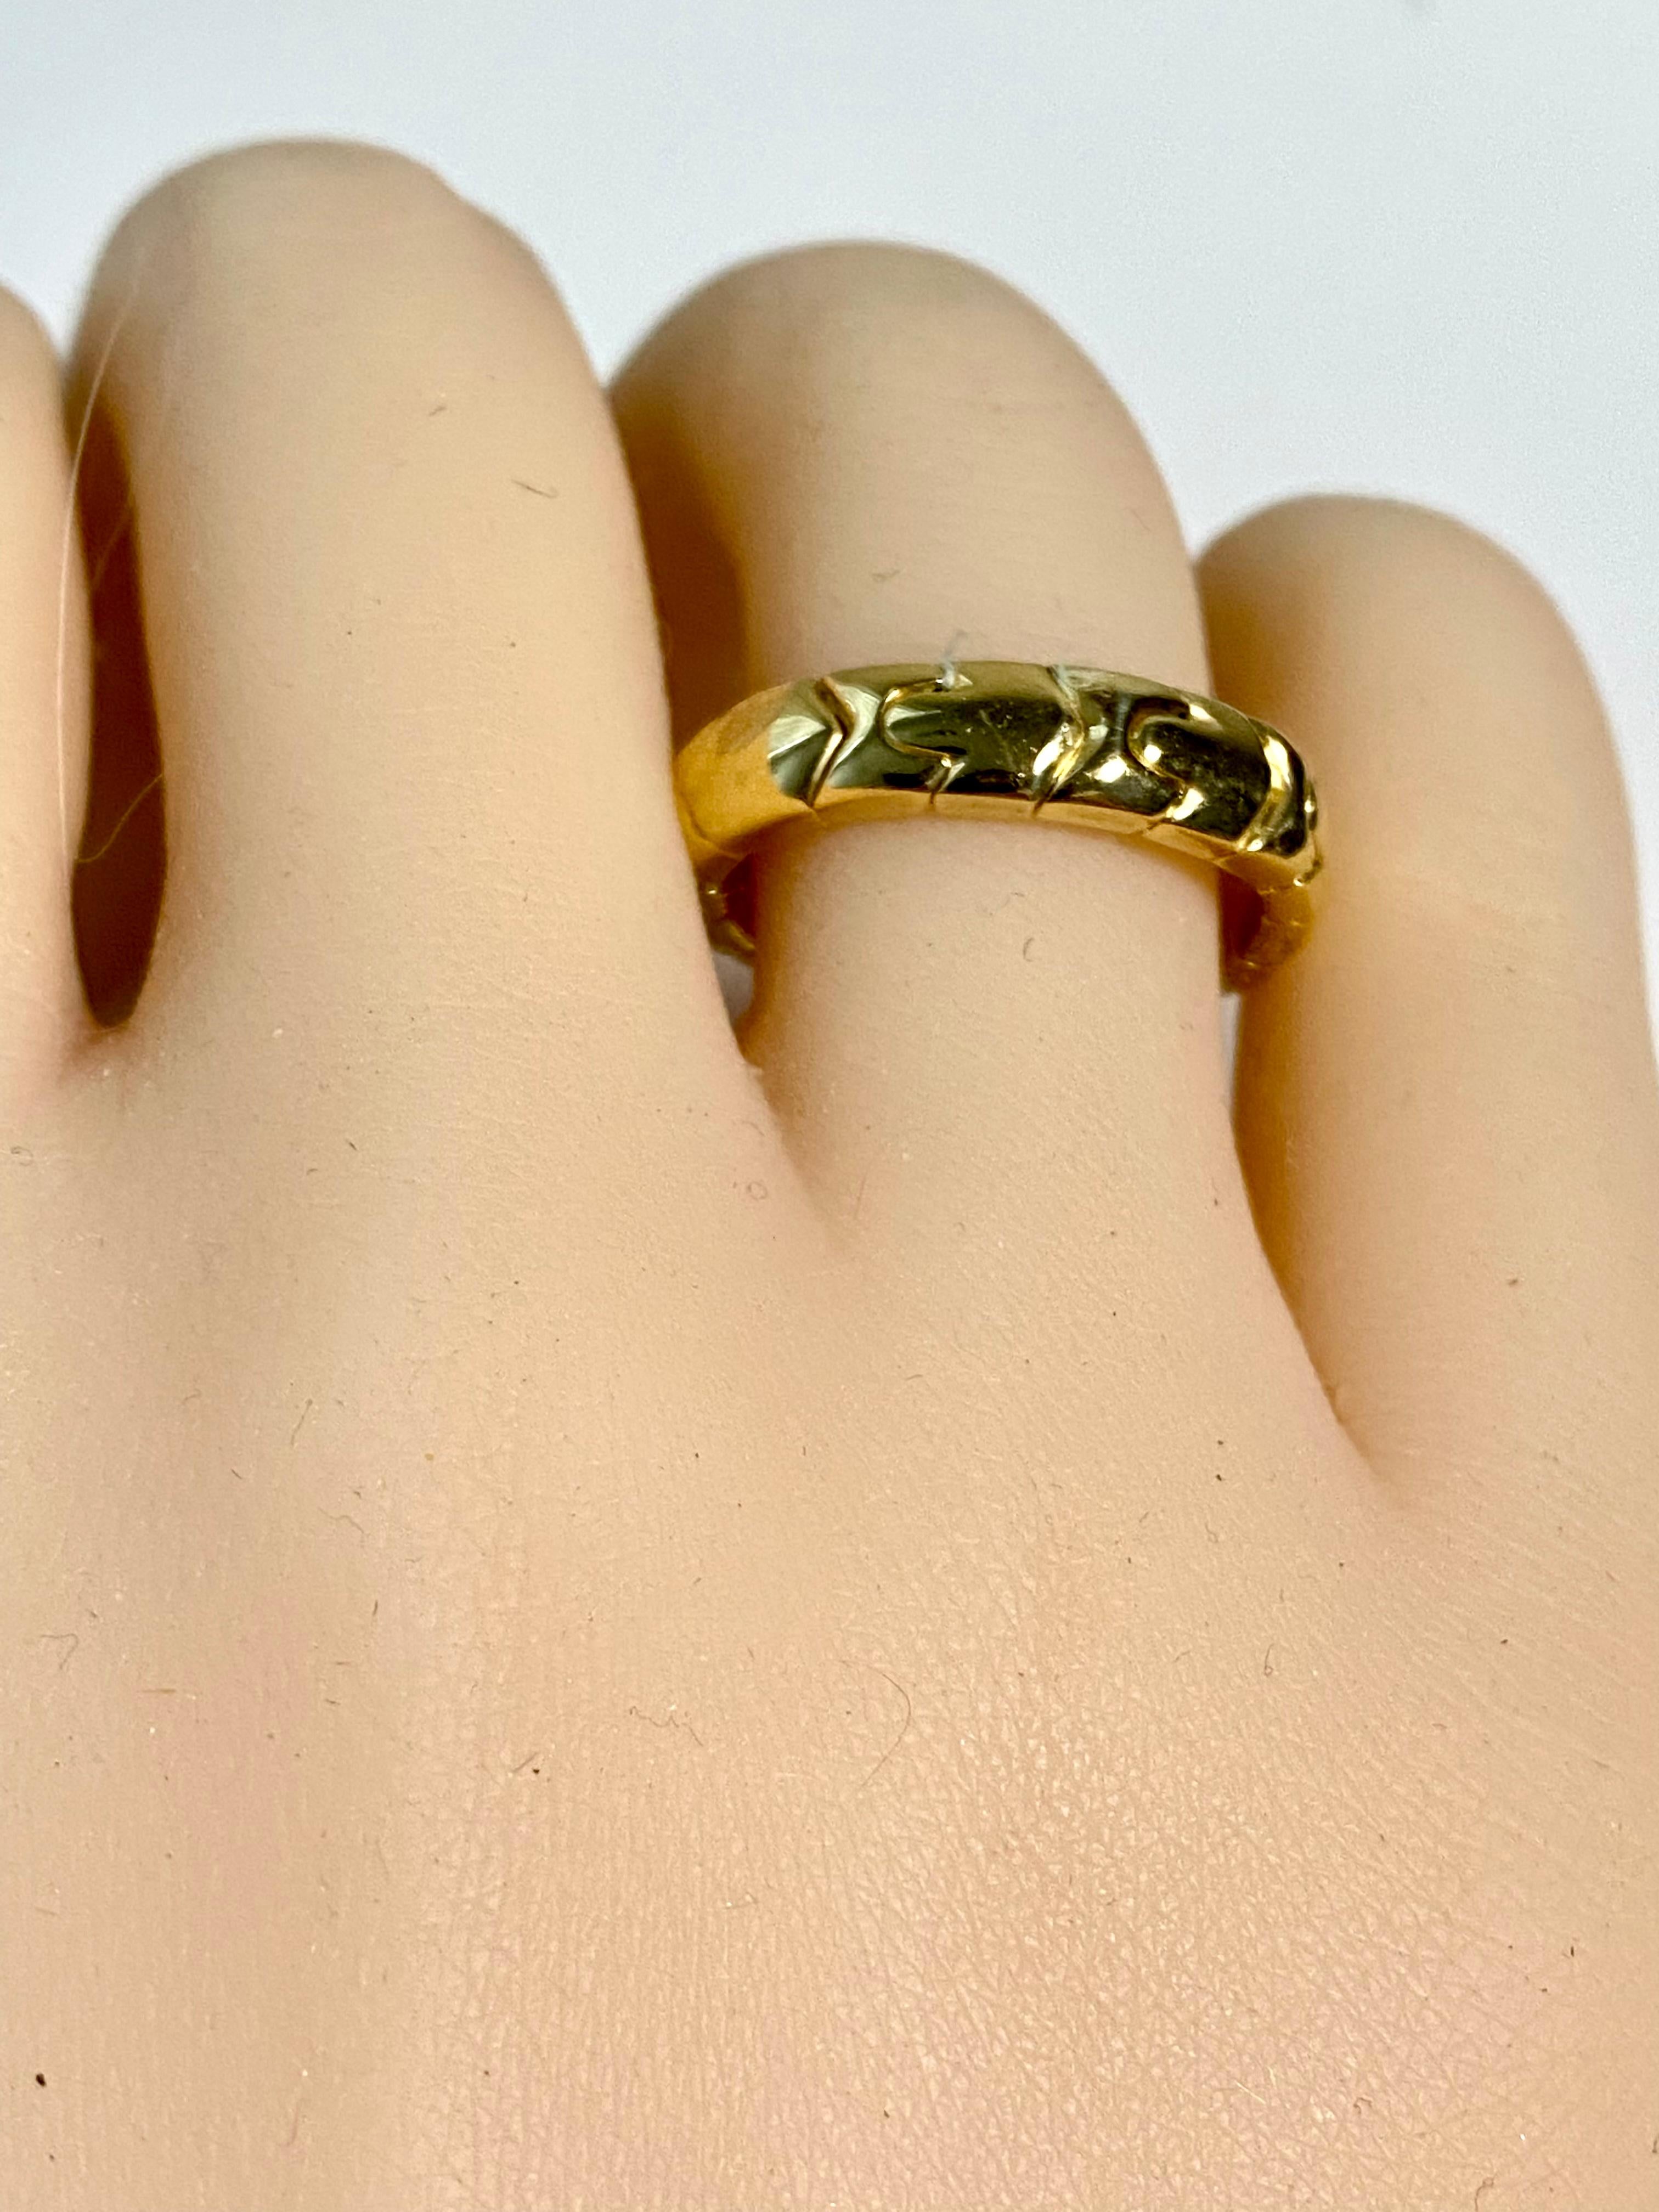 Bvlgari Passo Doppio Collection 18 Karat Gold Band Ring Finger Size 9 In Good Condition For Sale In New York, NY